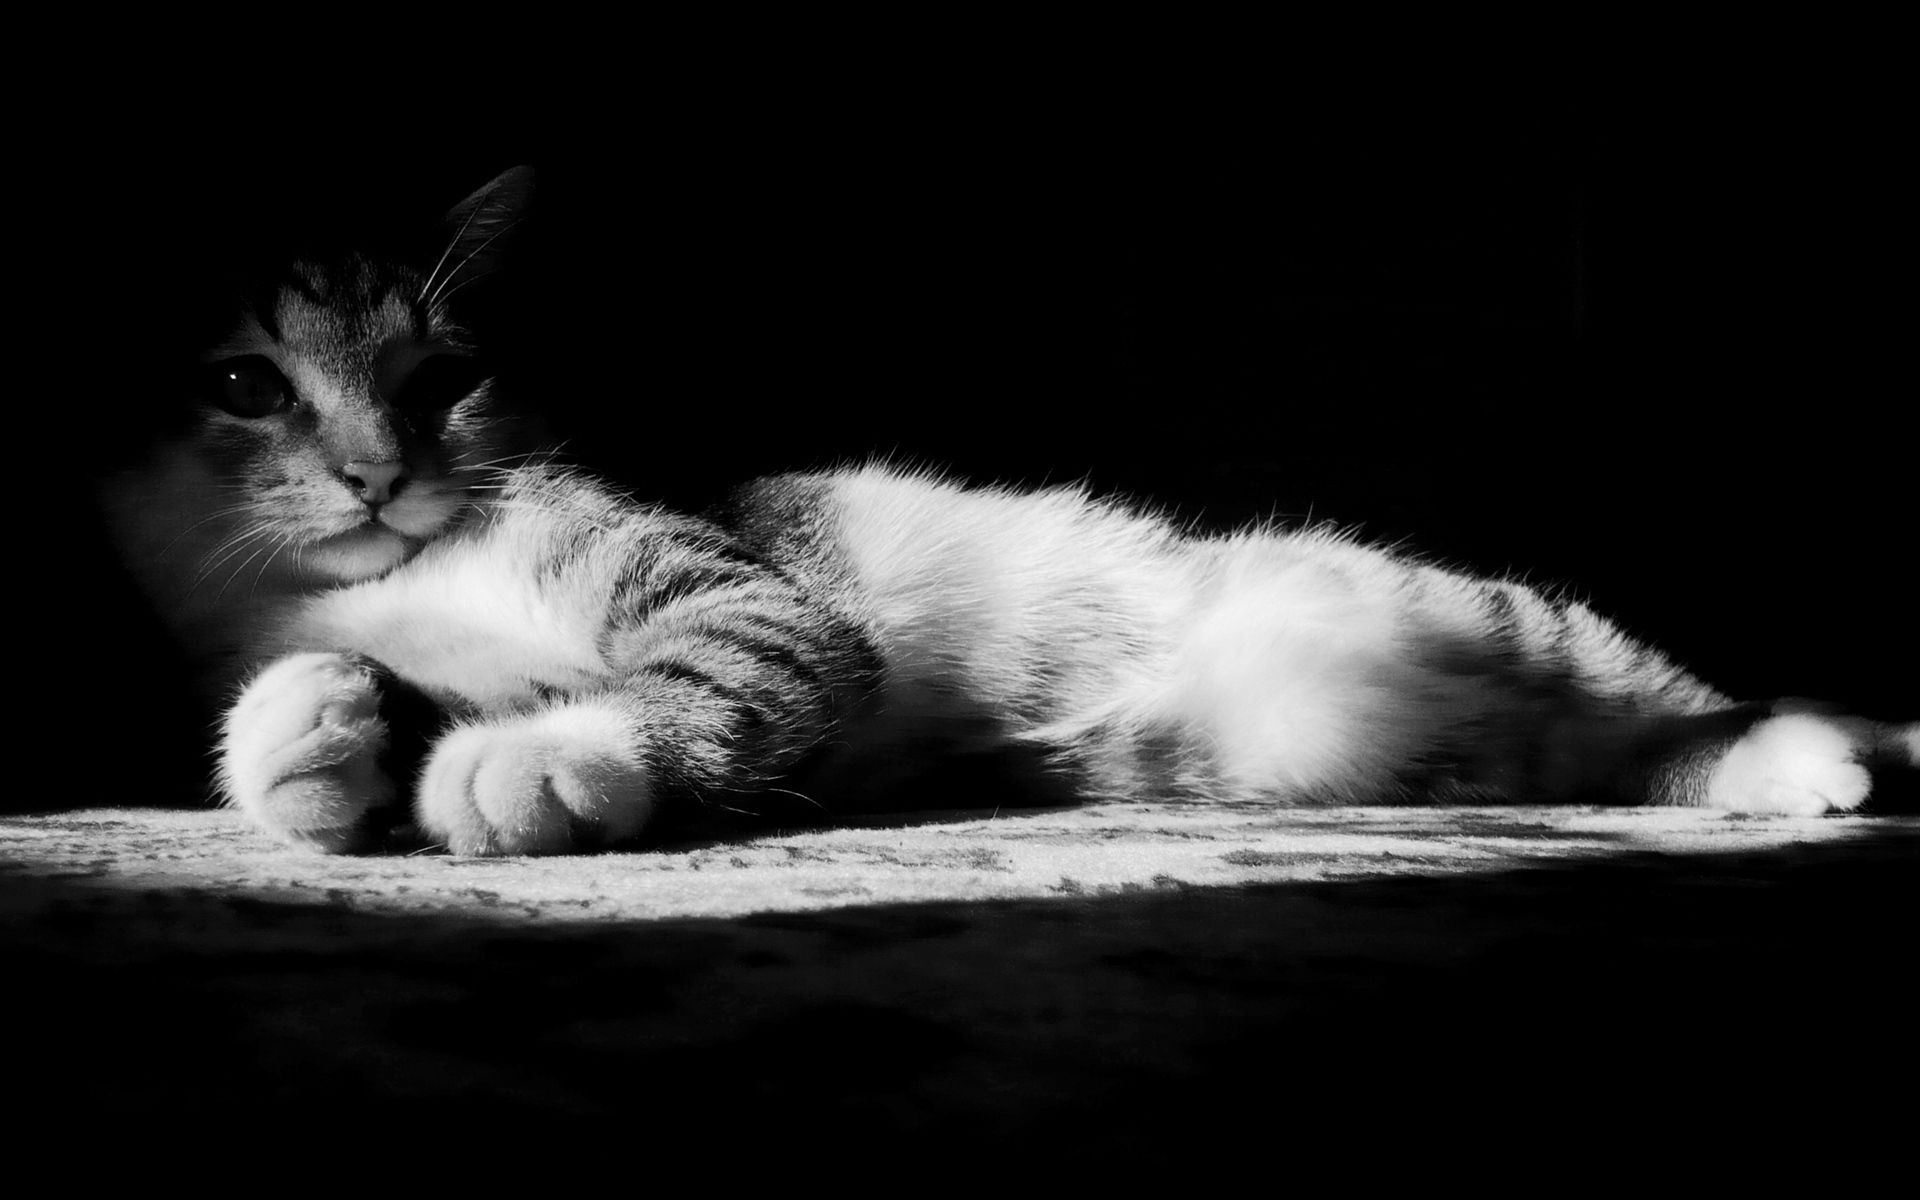 shadow, dark, cat, to lie down, lie, striped, bw, chb cell phone wallpapers